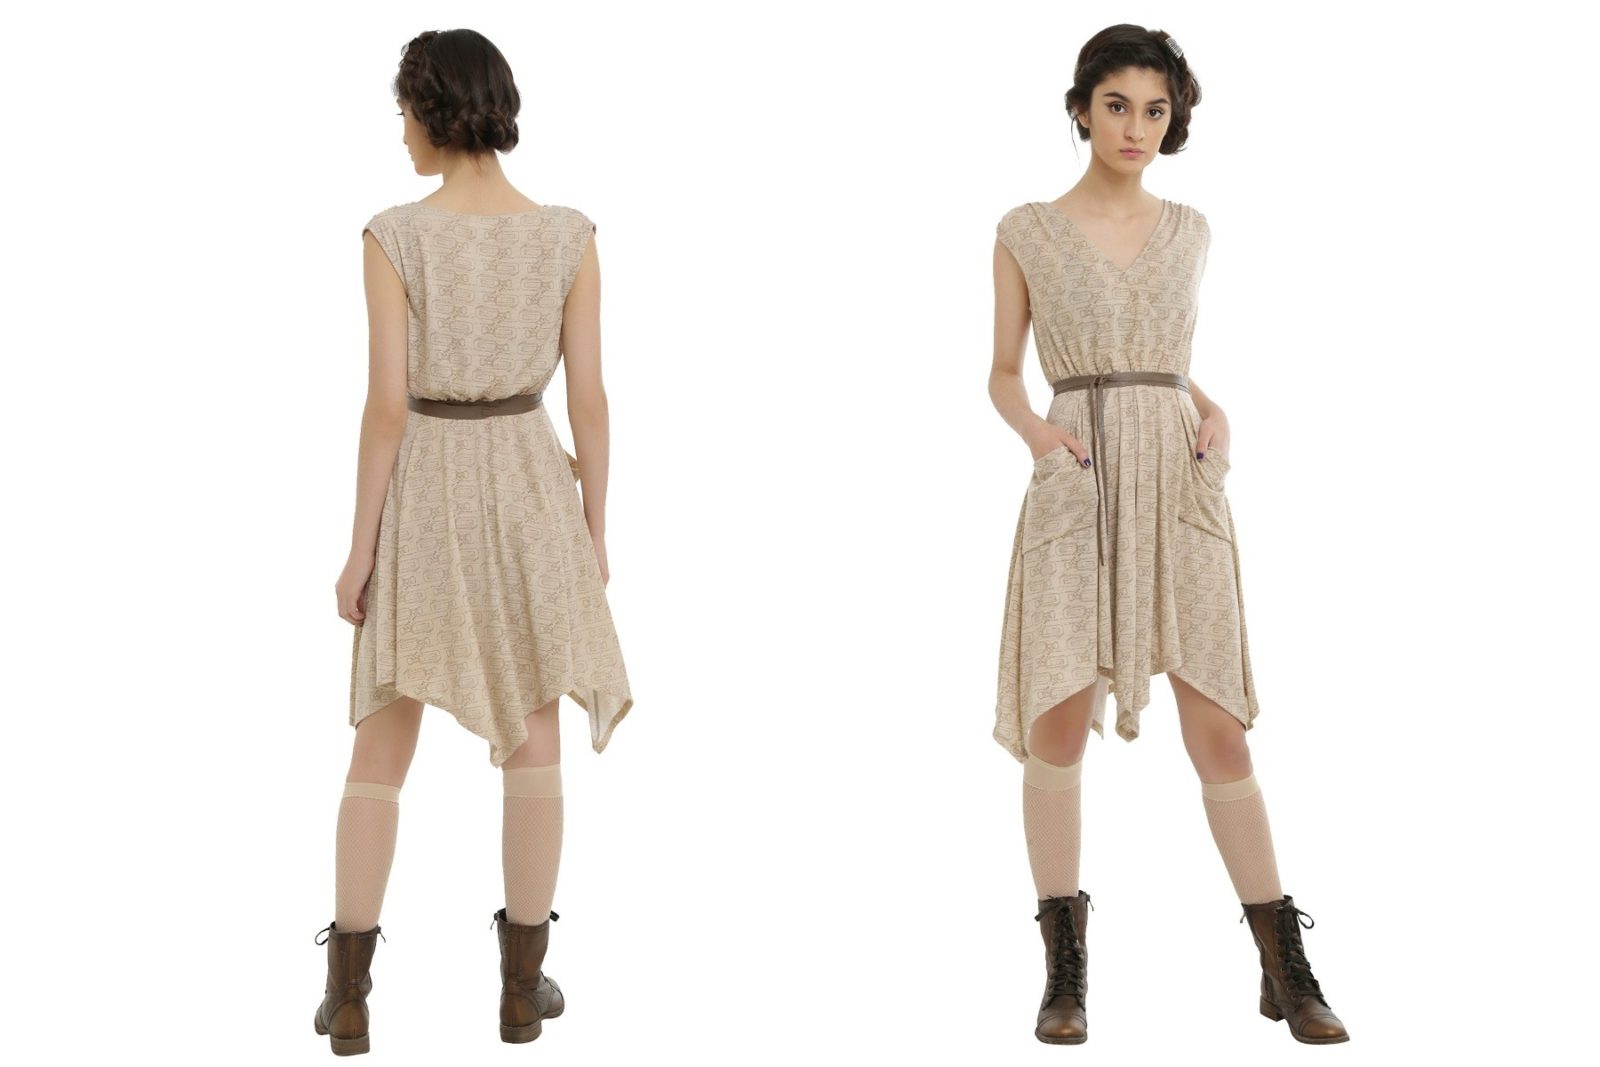 Her Universe x Hot Topic Rey dress!